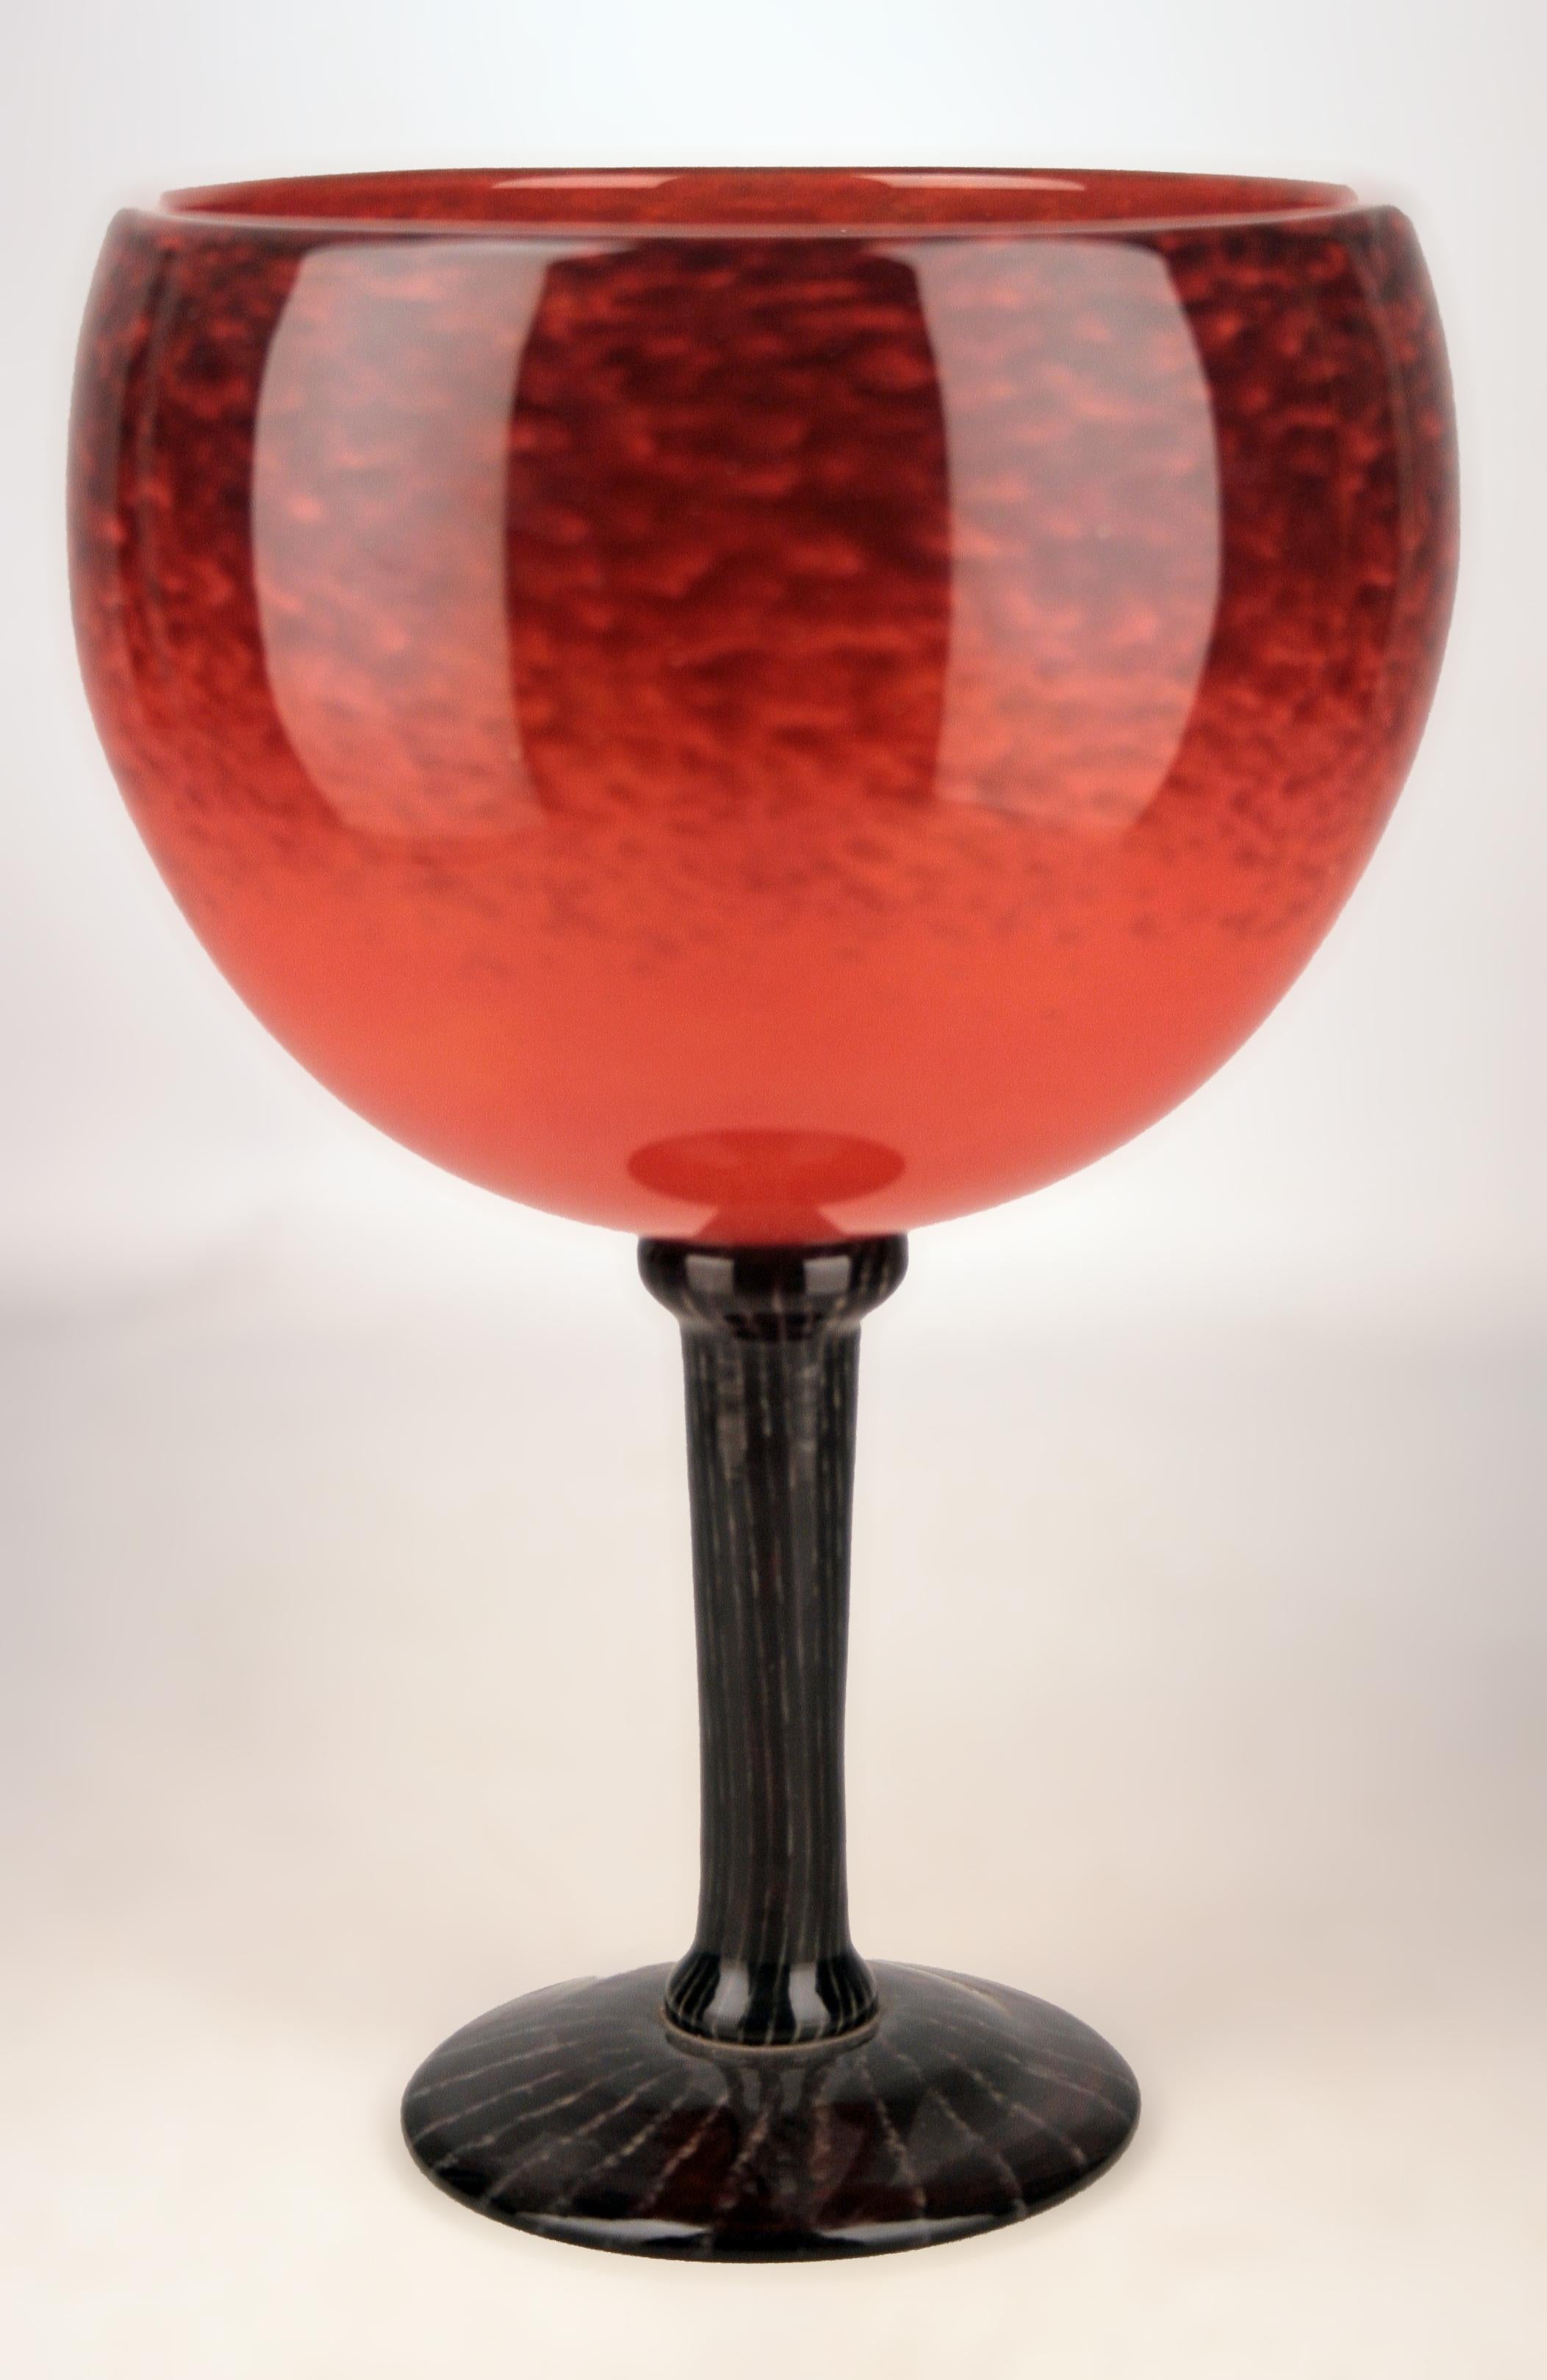 Early 20th century Art Déco french art glass footed vase by german artist Charles Schneider

By: Charles Schneider
Material: art glass, glass
Technique: cast, glazed, polished
Dimensions: 8 in x 11.5 in
Date: early 20th century, circa 1920
Style: